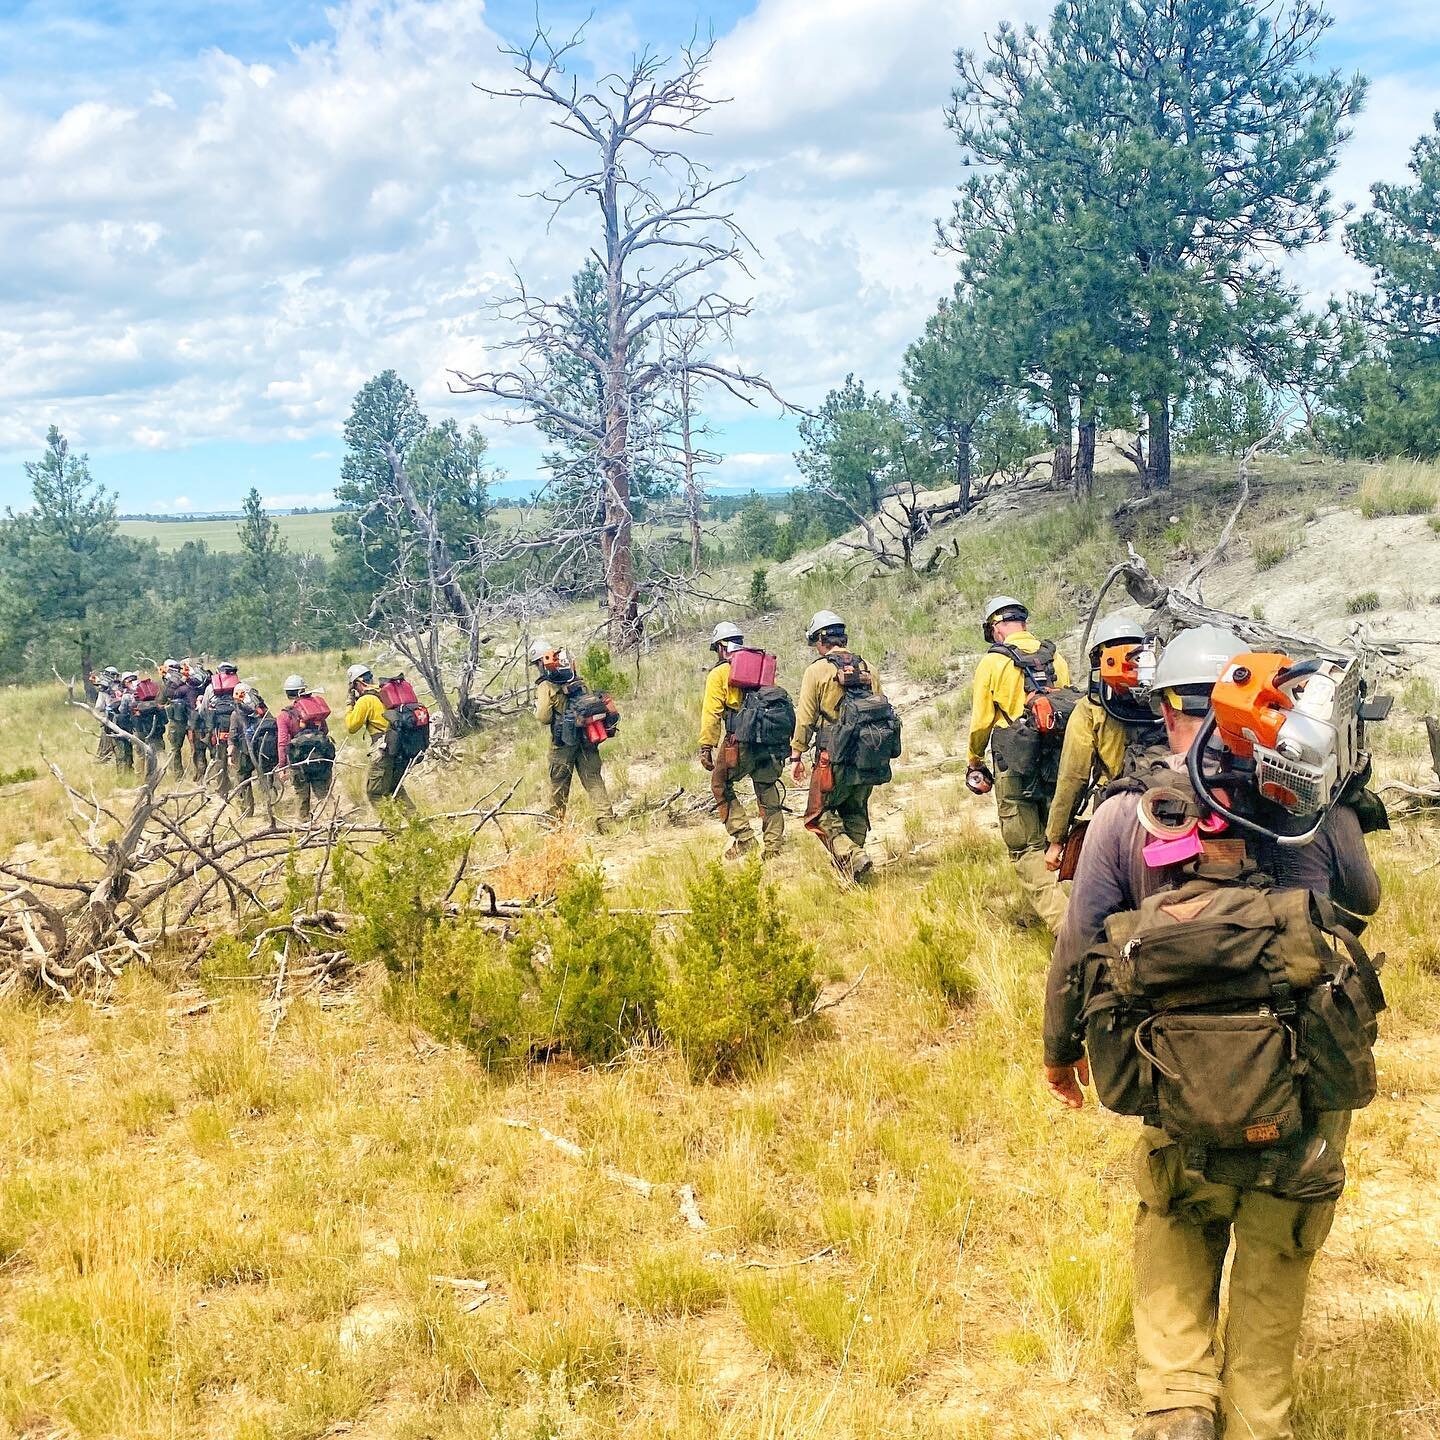 Excited to say I&rsquo;ll be working in Montana this summer as a wildland firefighter! Our crew has been training hard in preparation for the fire season. Posts and van build tutorials will be a bit less regular over the next few months, but I&rsquo;